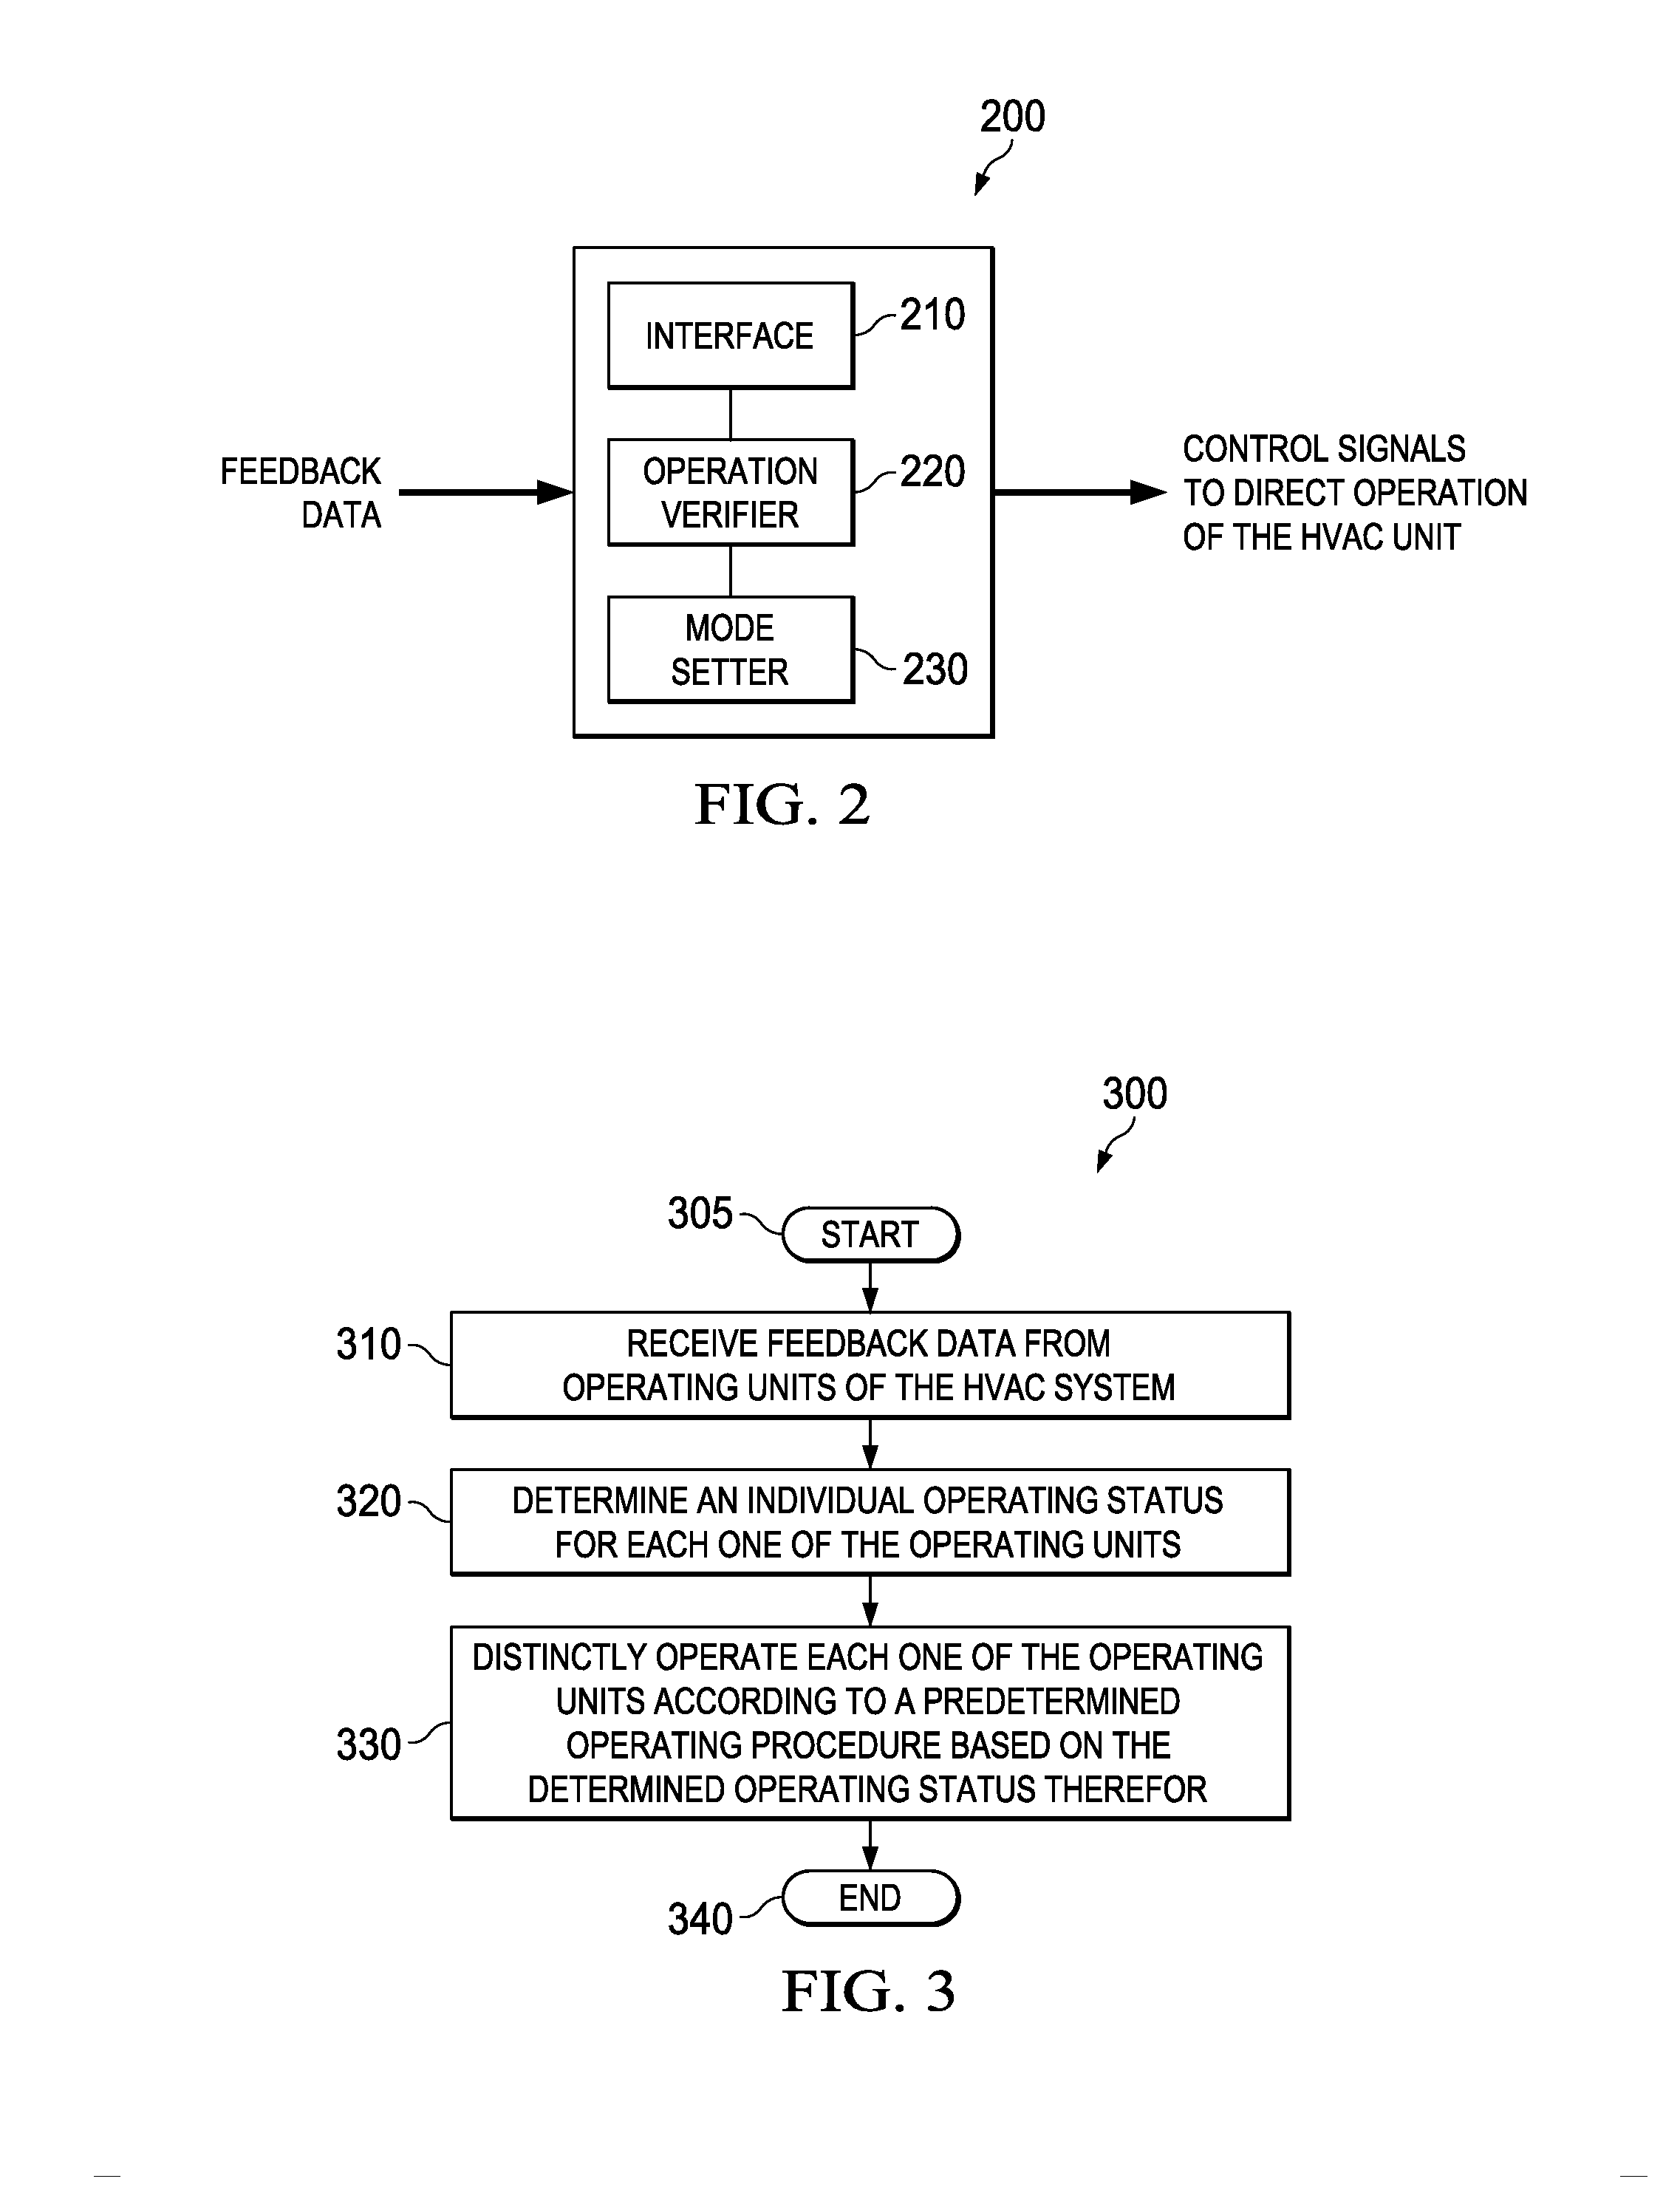 Methods of operating an HVAC system, an HVAC system and a controller therefor employing a self-check scheme and predetermined operating procedures associated with operating units of an HVAC system